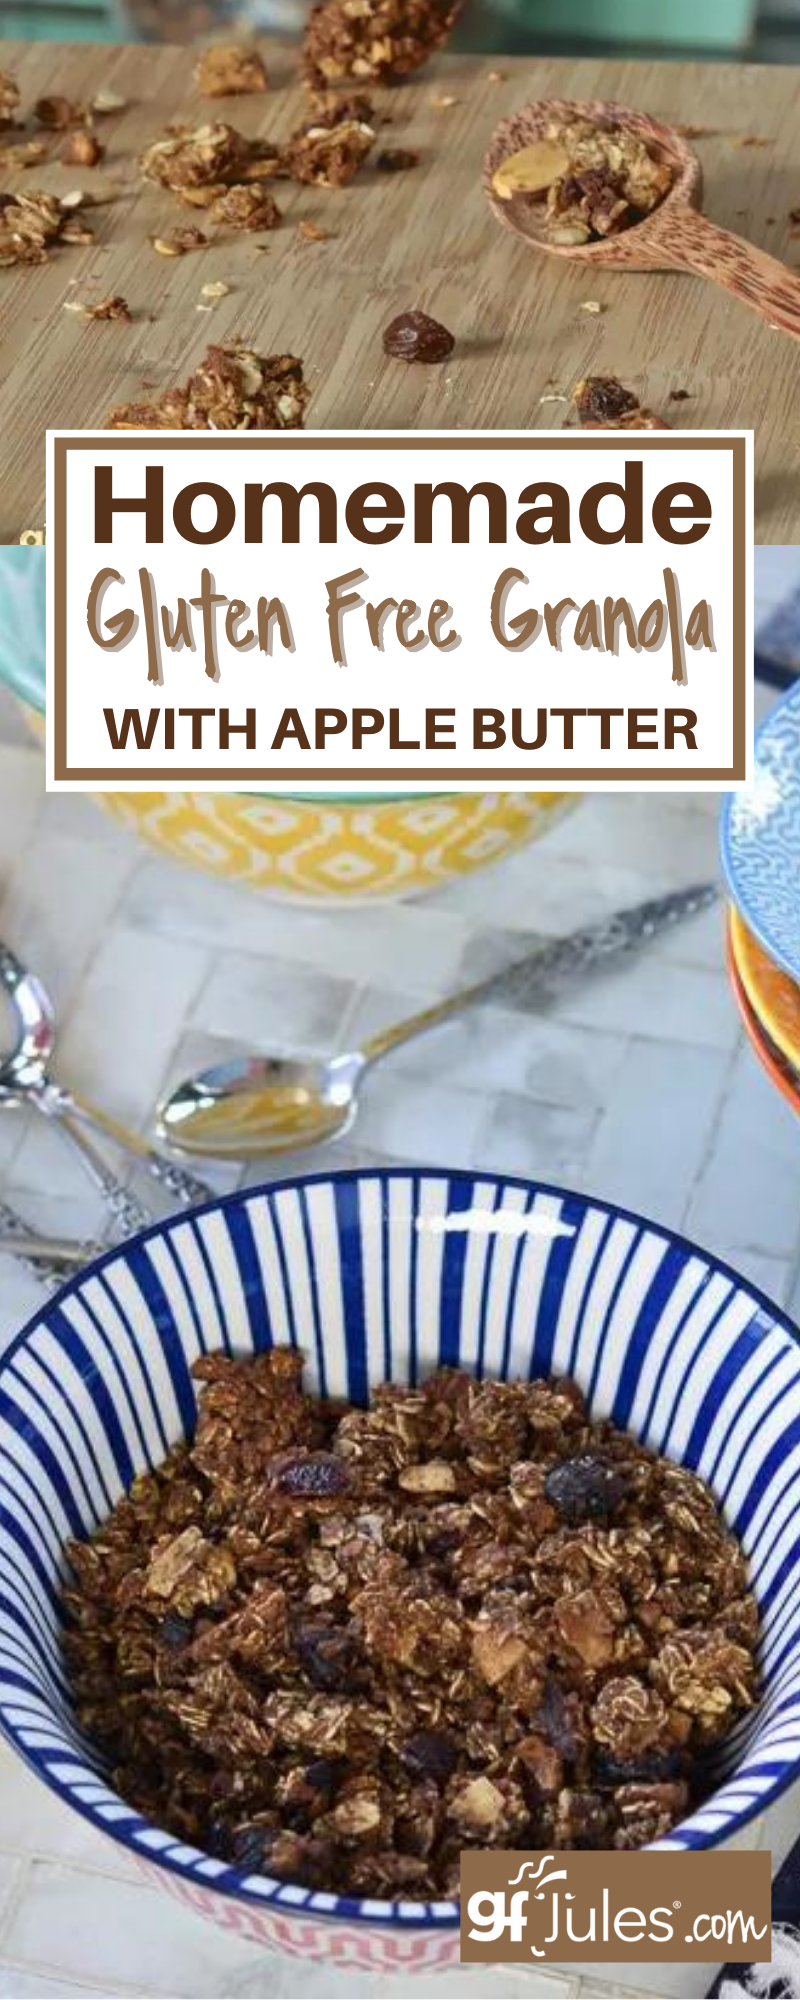 Gluten Free Granola with Apple Butter PIN